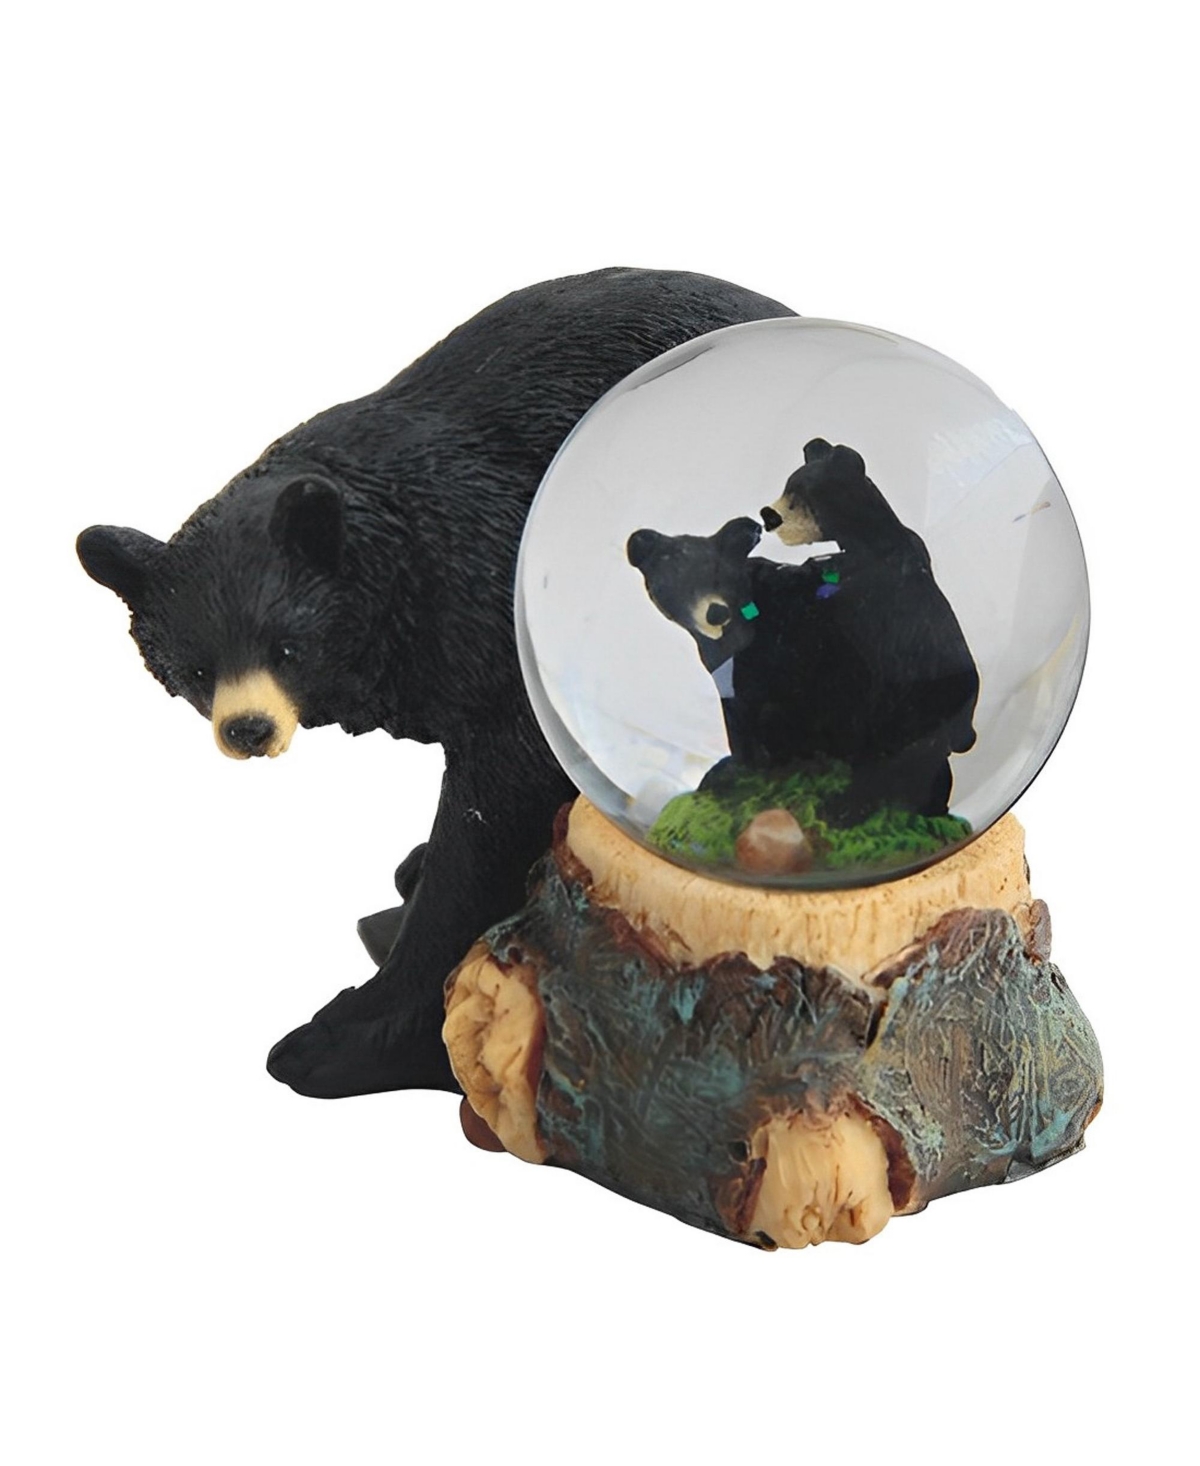 3.5"H Black Bear Glitter Snow Globe Figurine Home Decor Perfect Gift for House Warming, Holidays and Birthdays - Multicolor